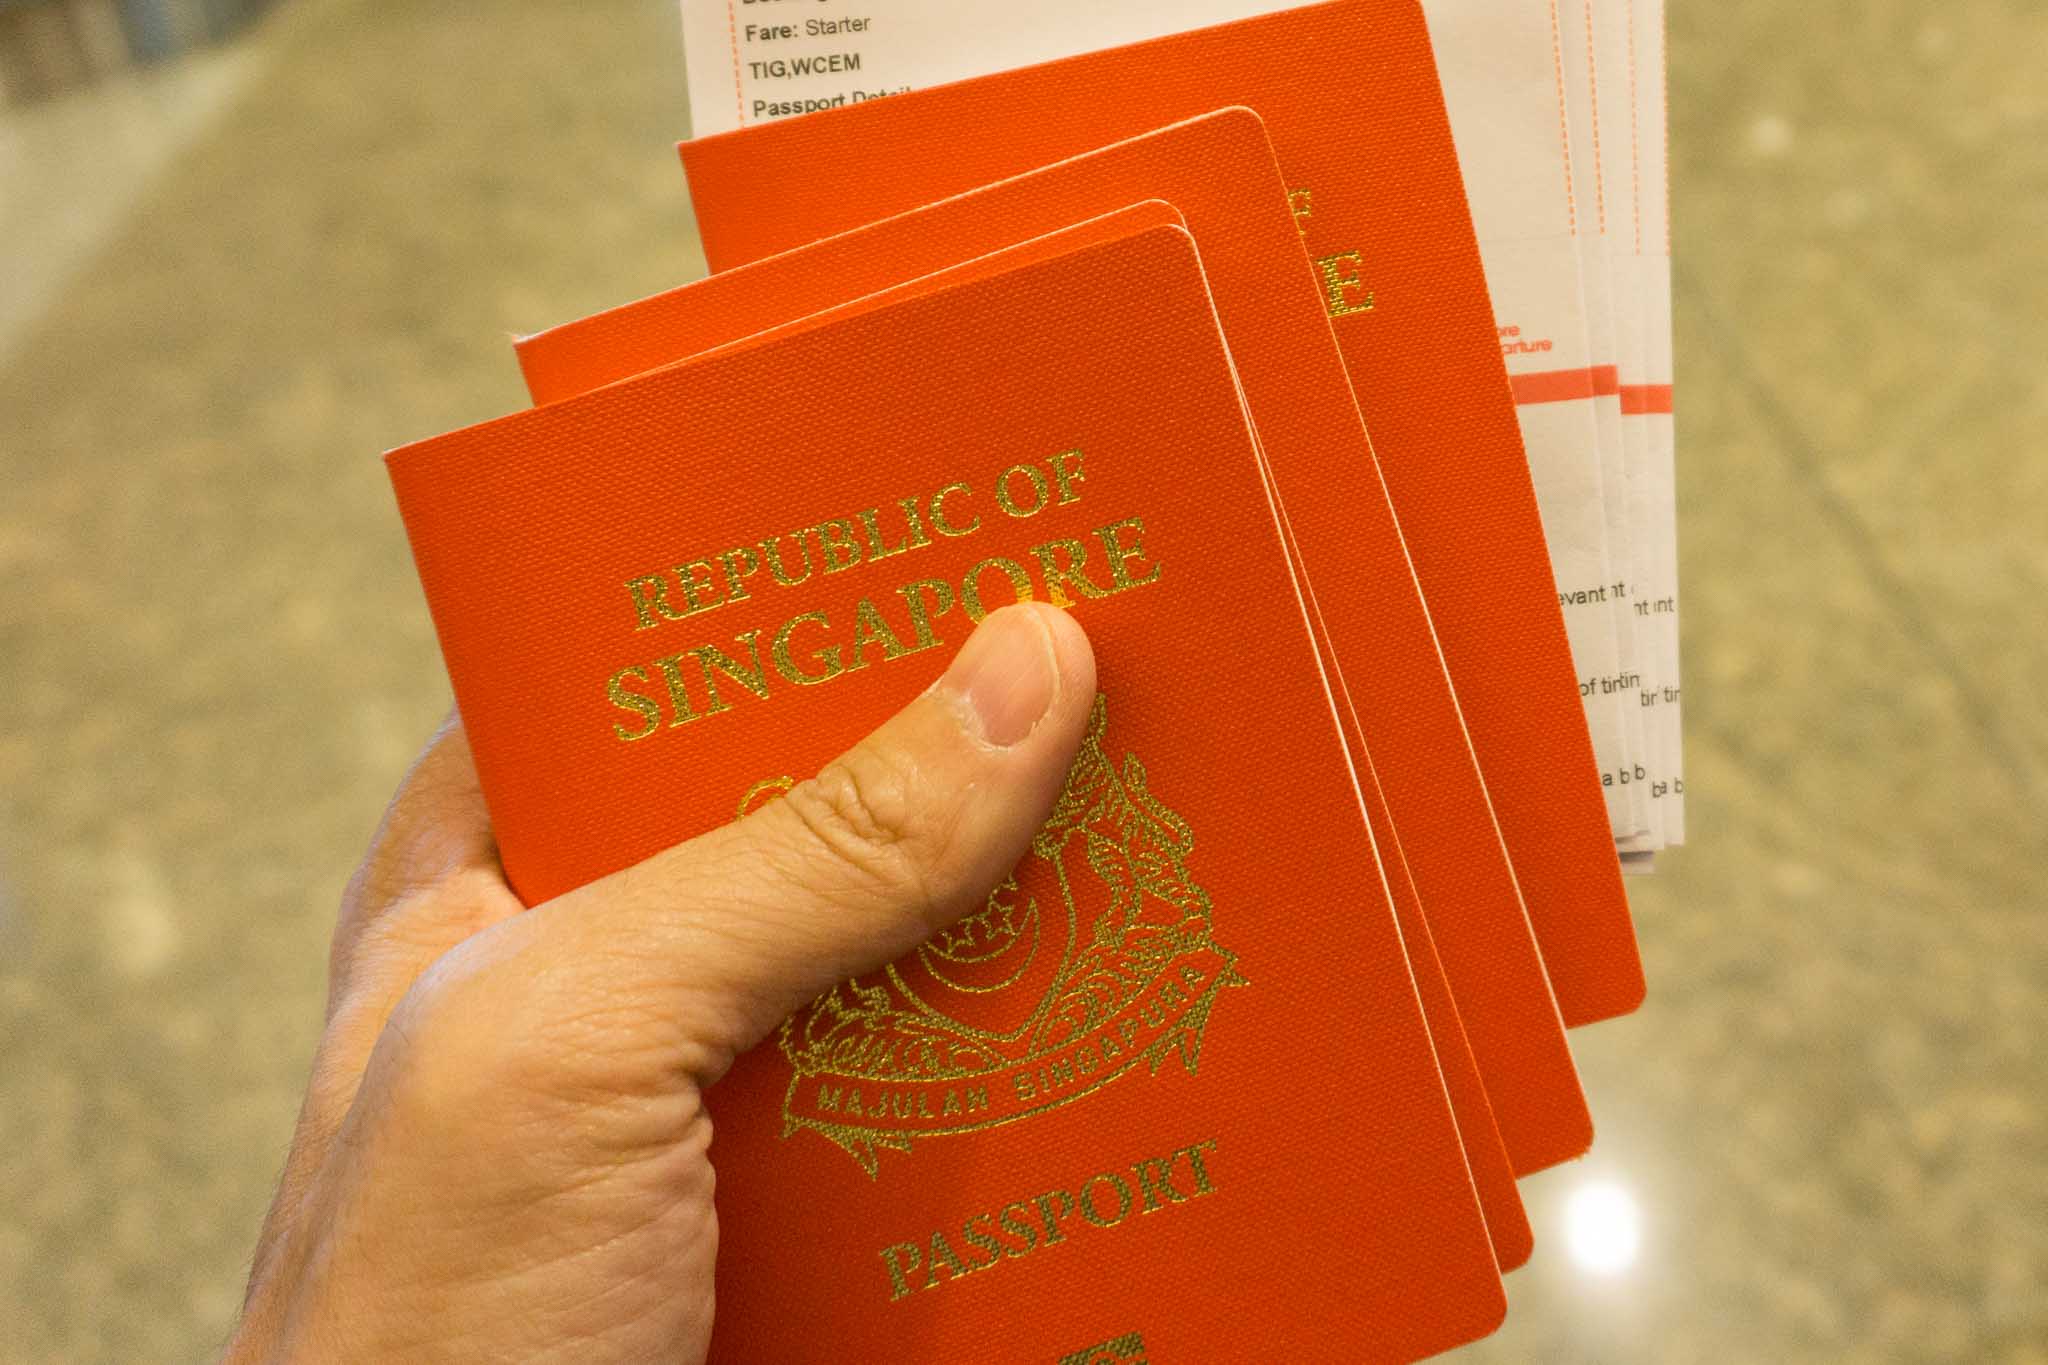 Singapore's Passport Ranked The Most Powerful in The World - WORLD OF BUZZ 2